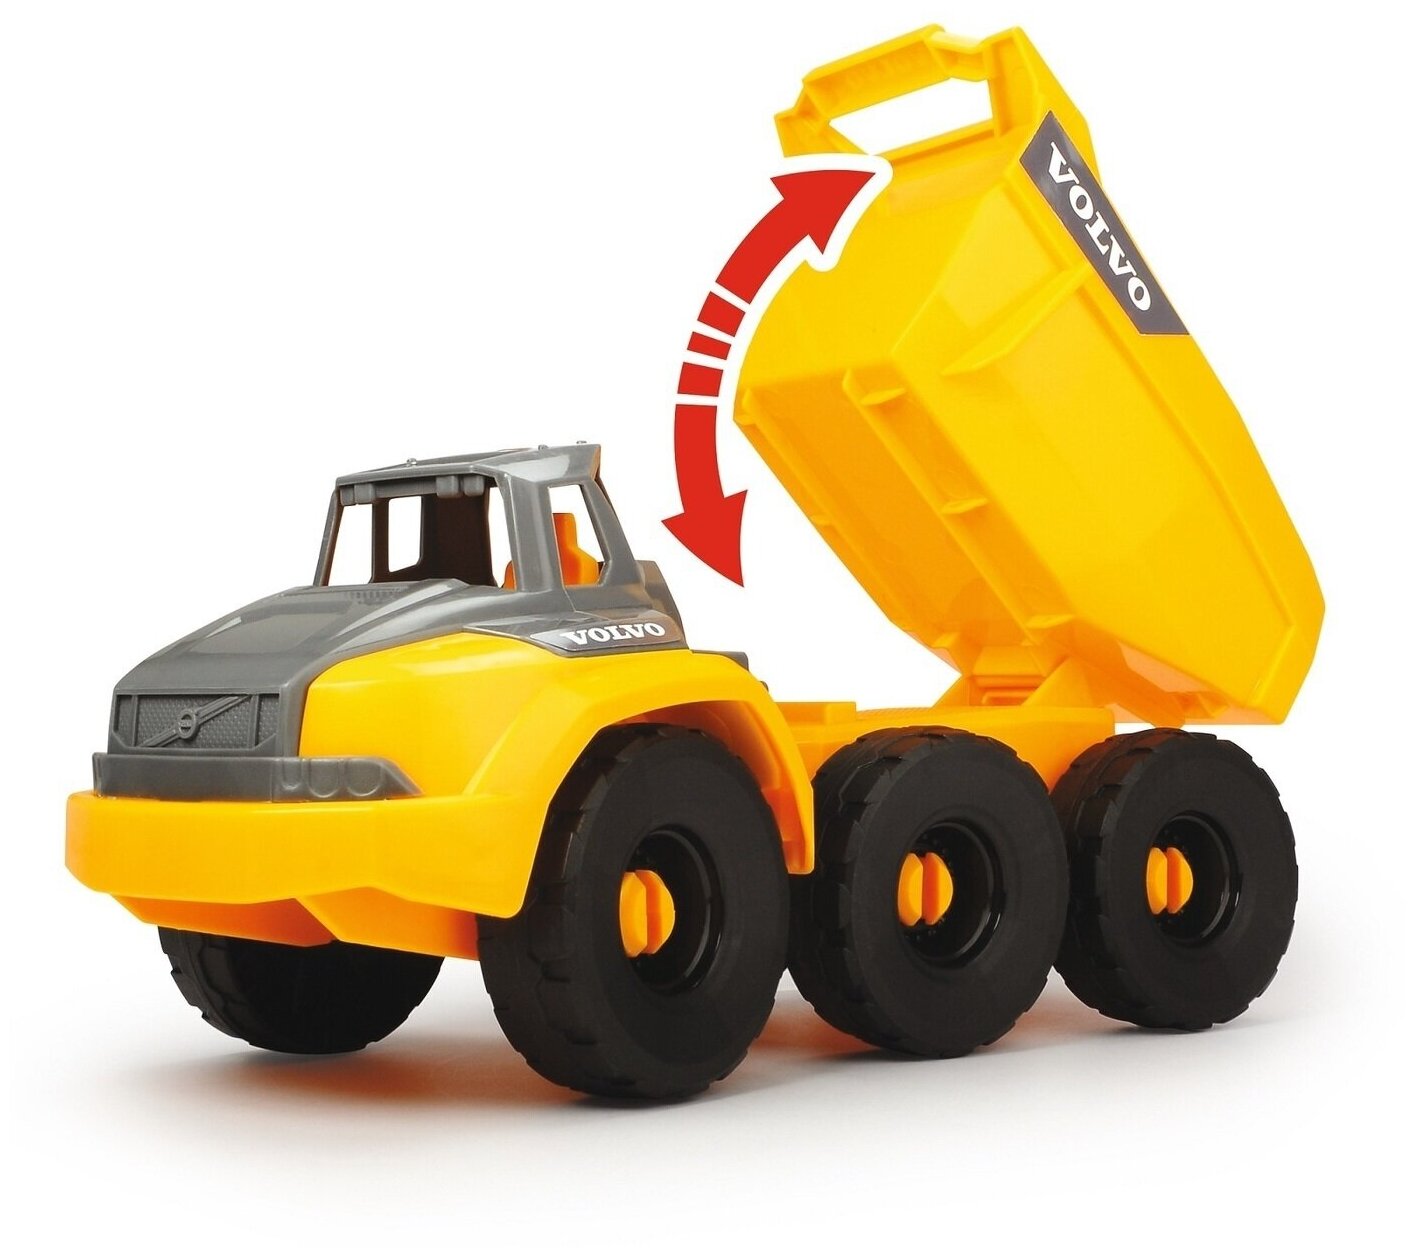 Набор Construction Volvo Dickie Toys 3729013